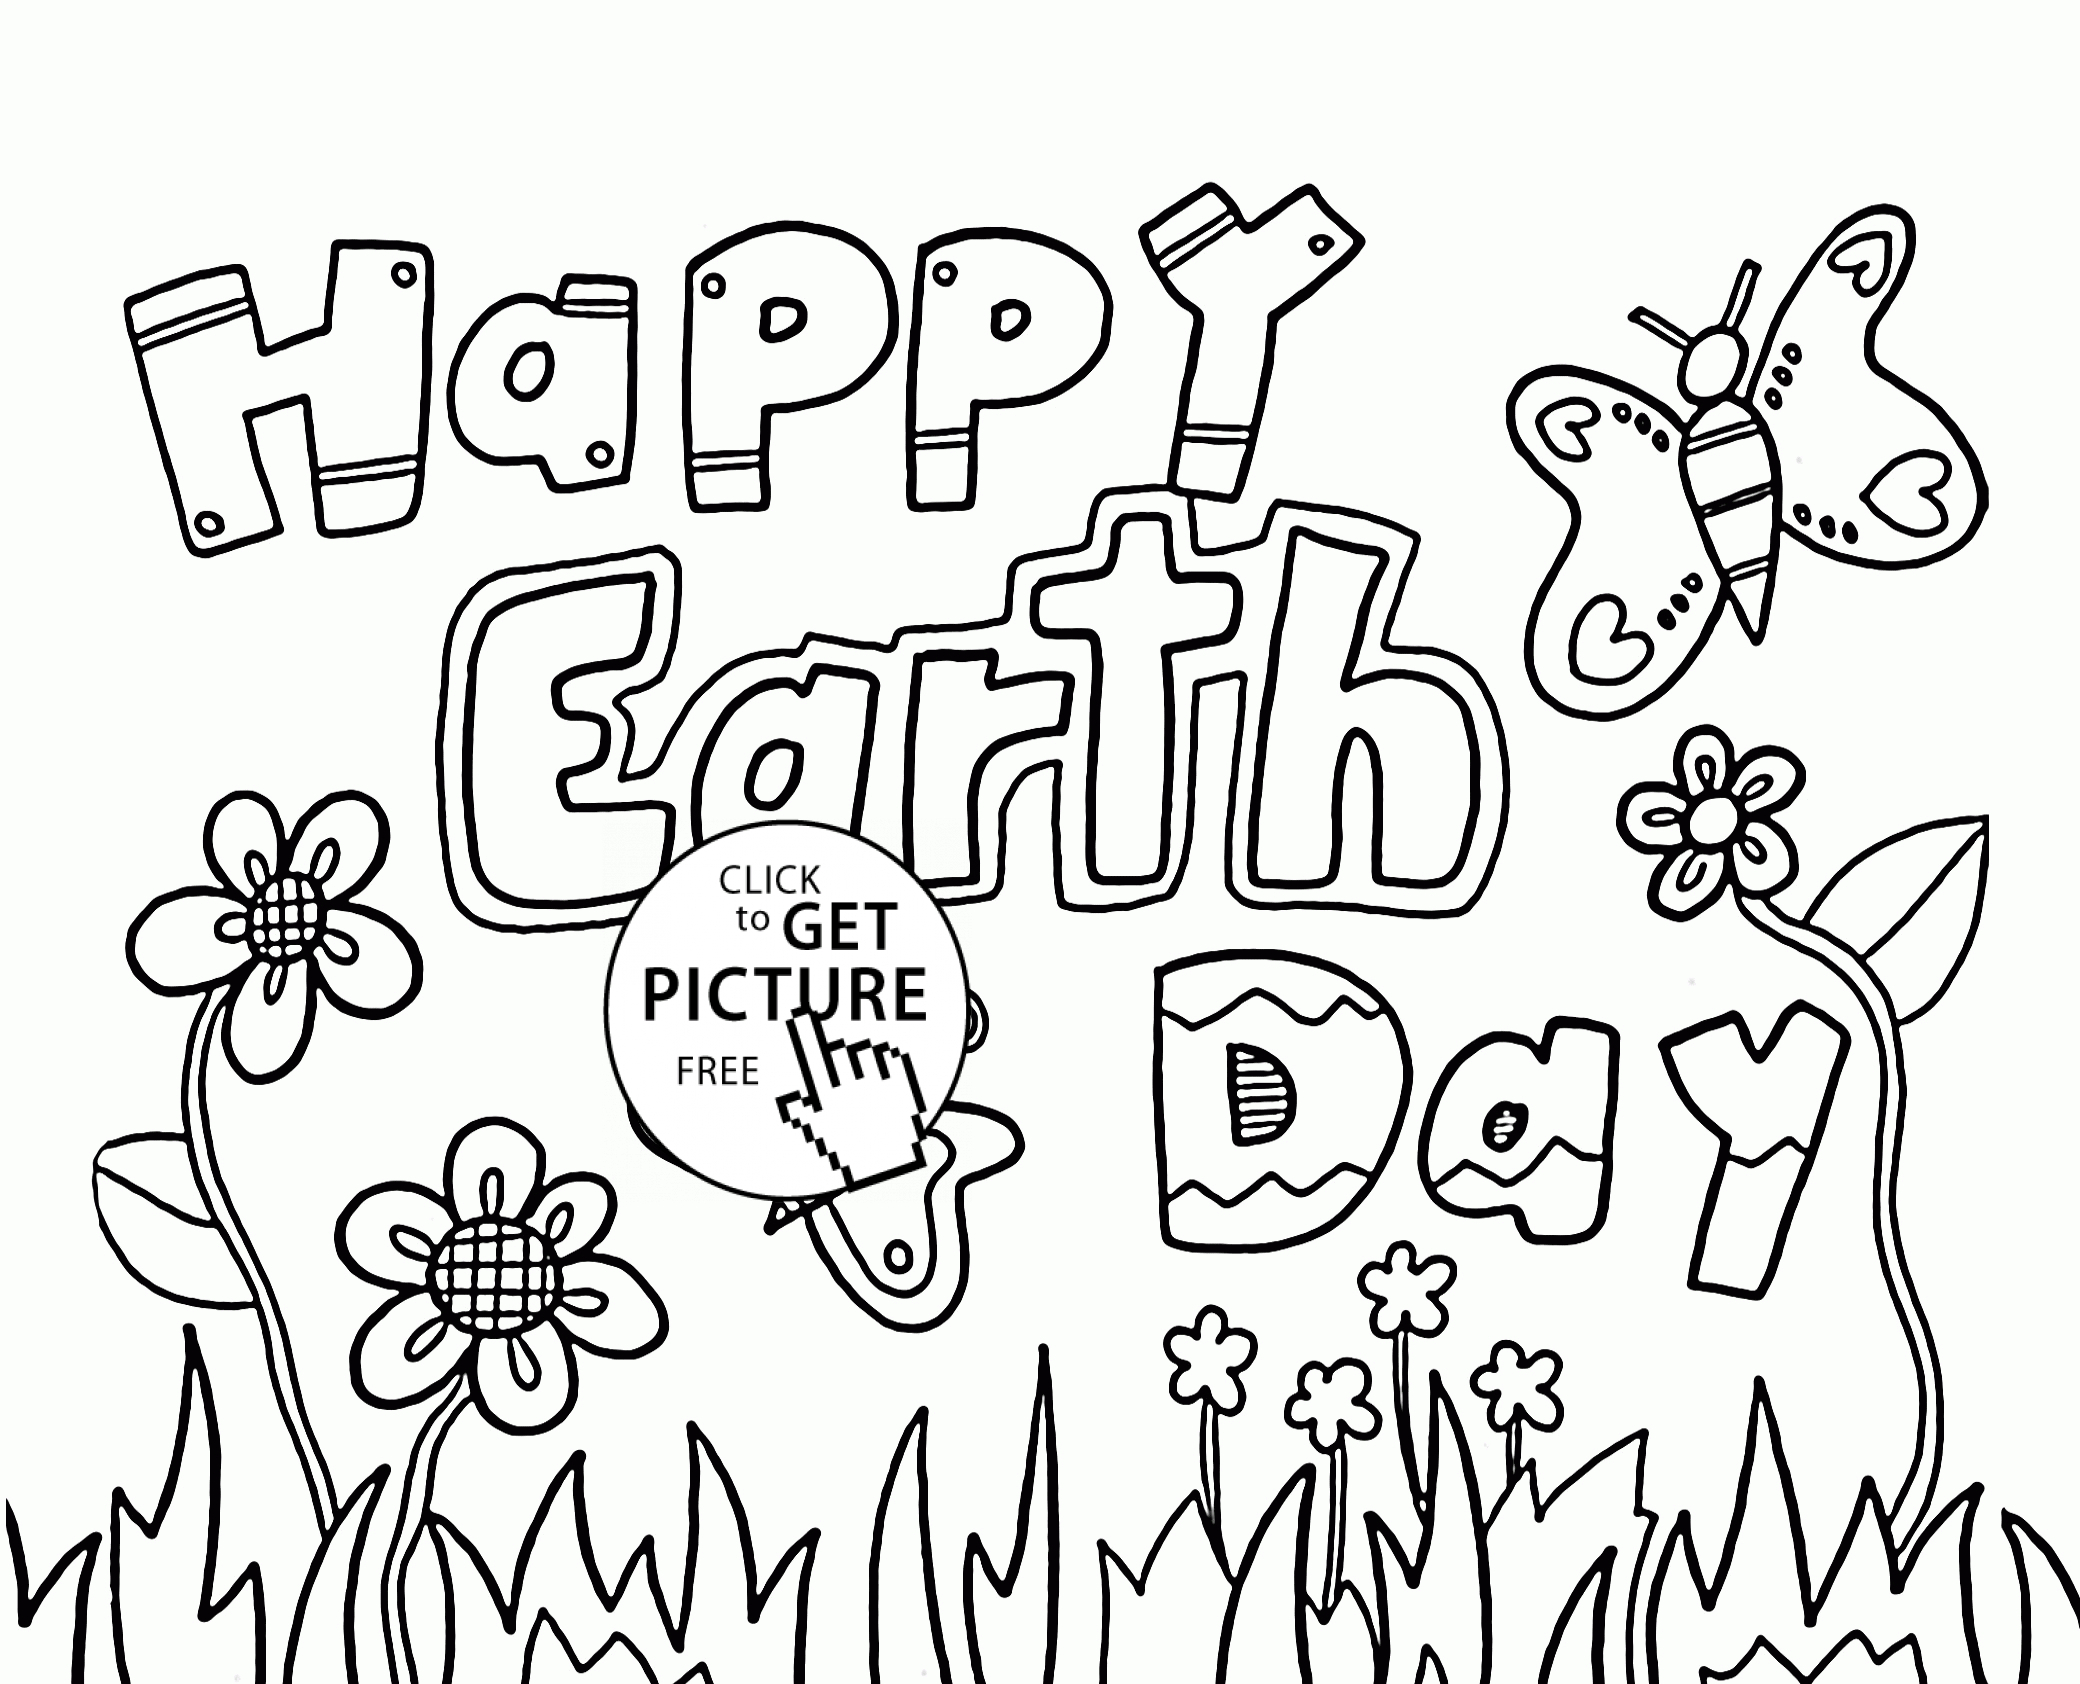 Free Printable Earth Day Coloring Pages And Activities Coloring Pages Earth Dayg Pages Free Printables Cute Cartoon